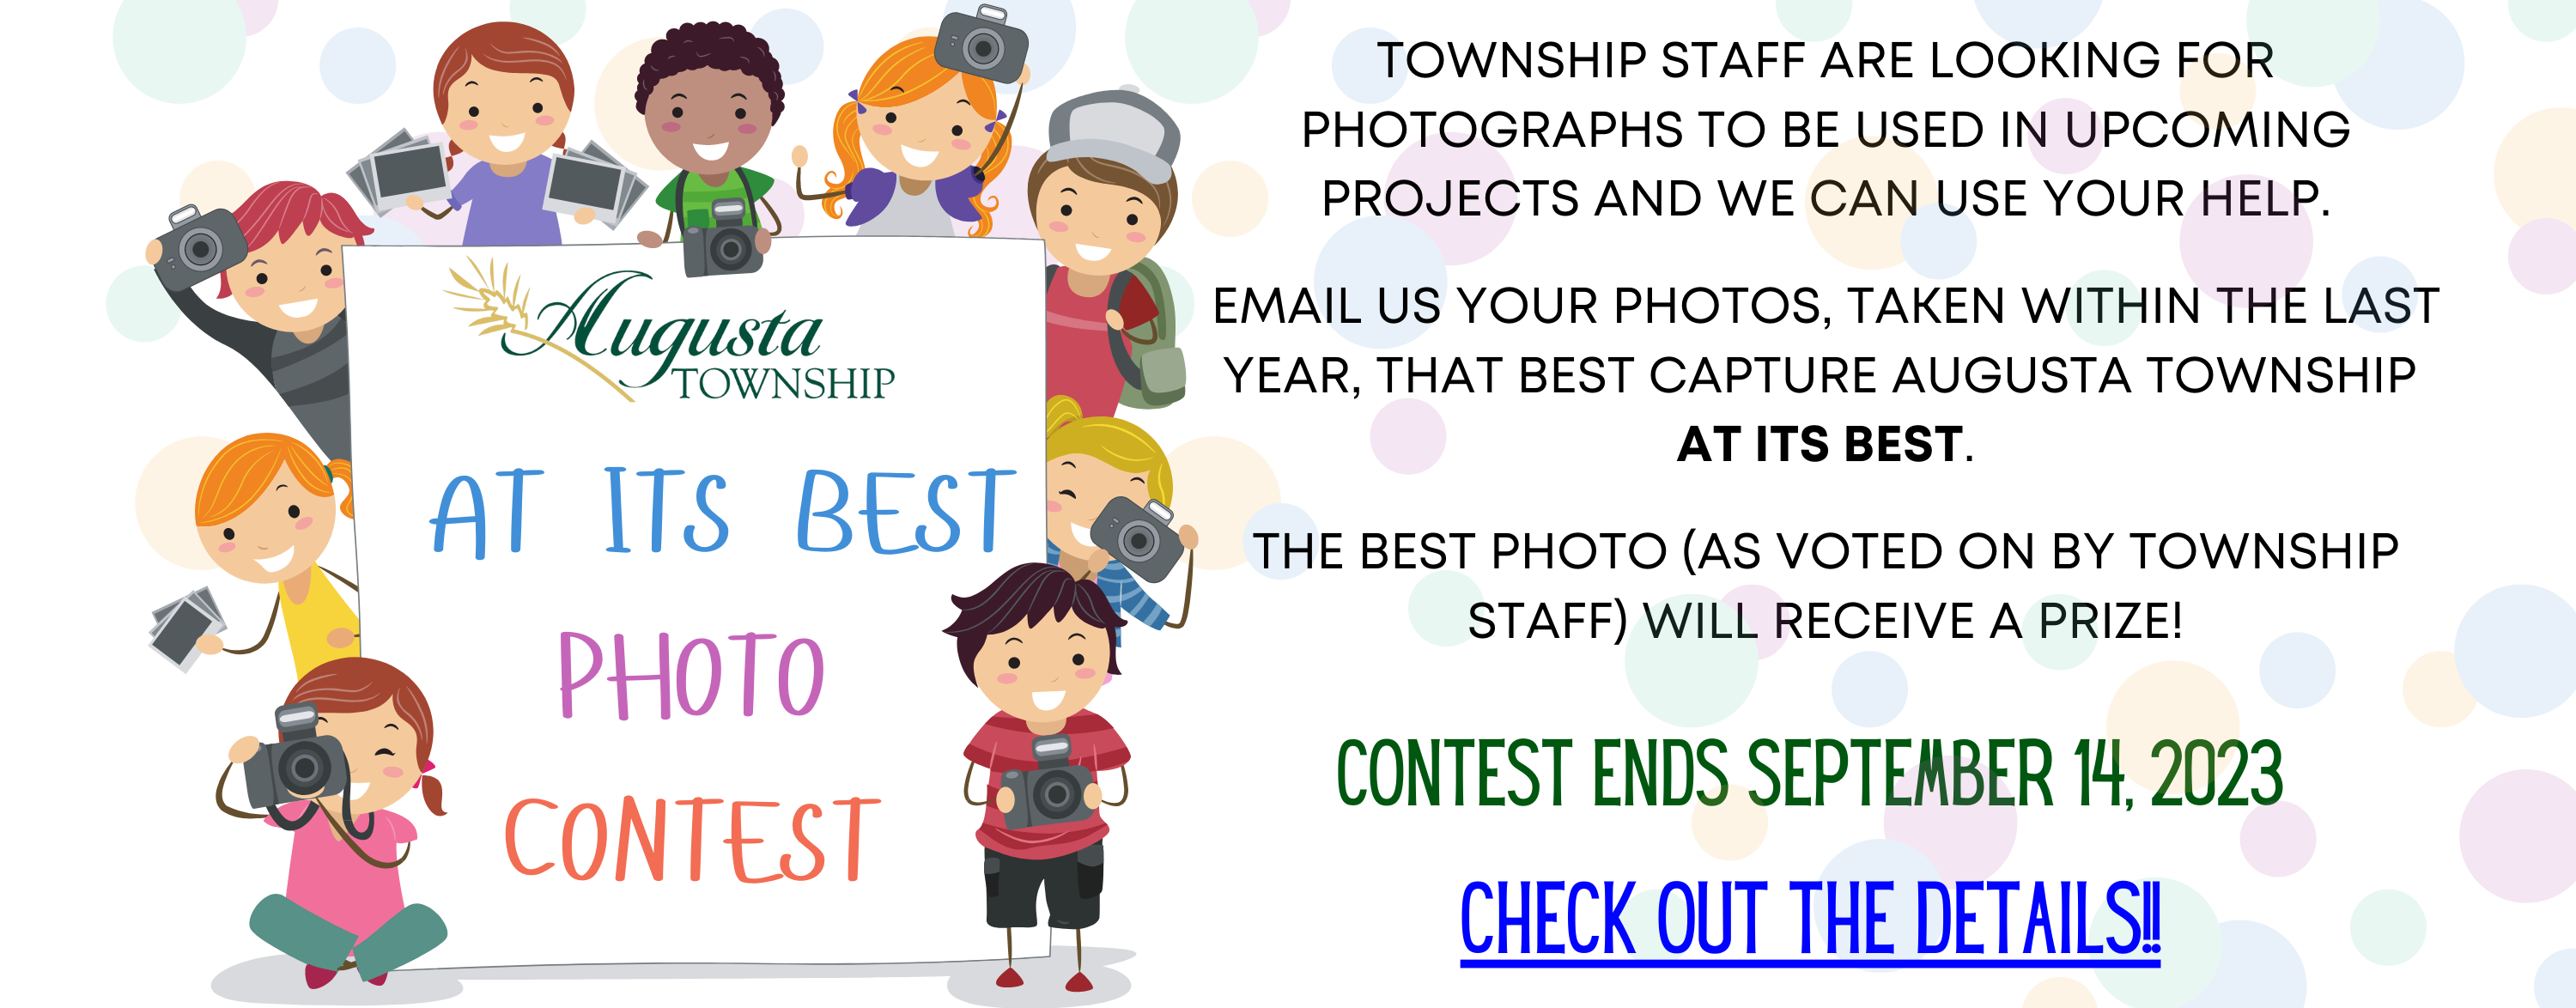 at its best photo contest